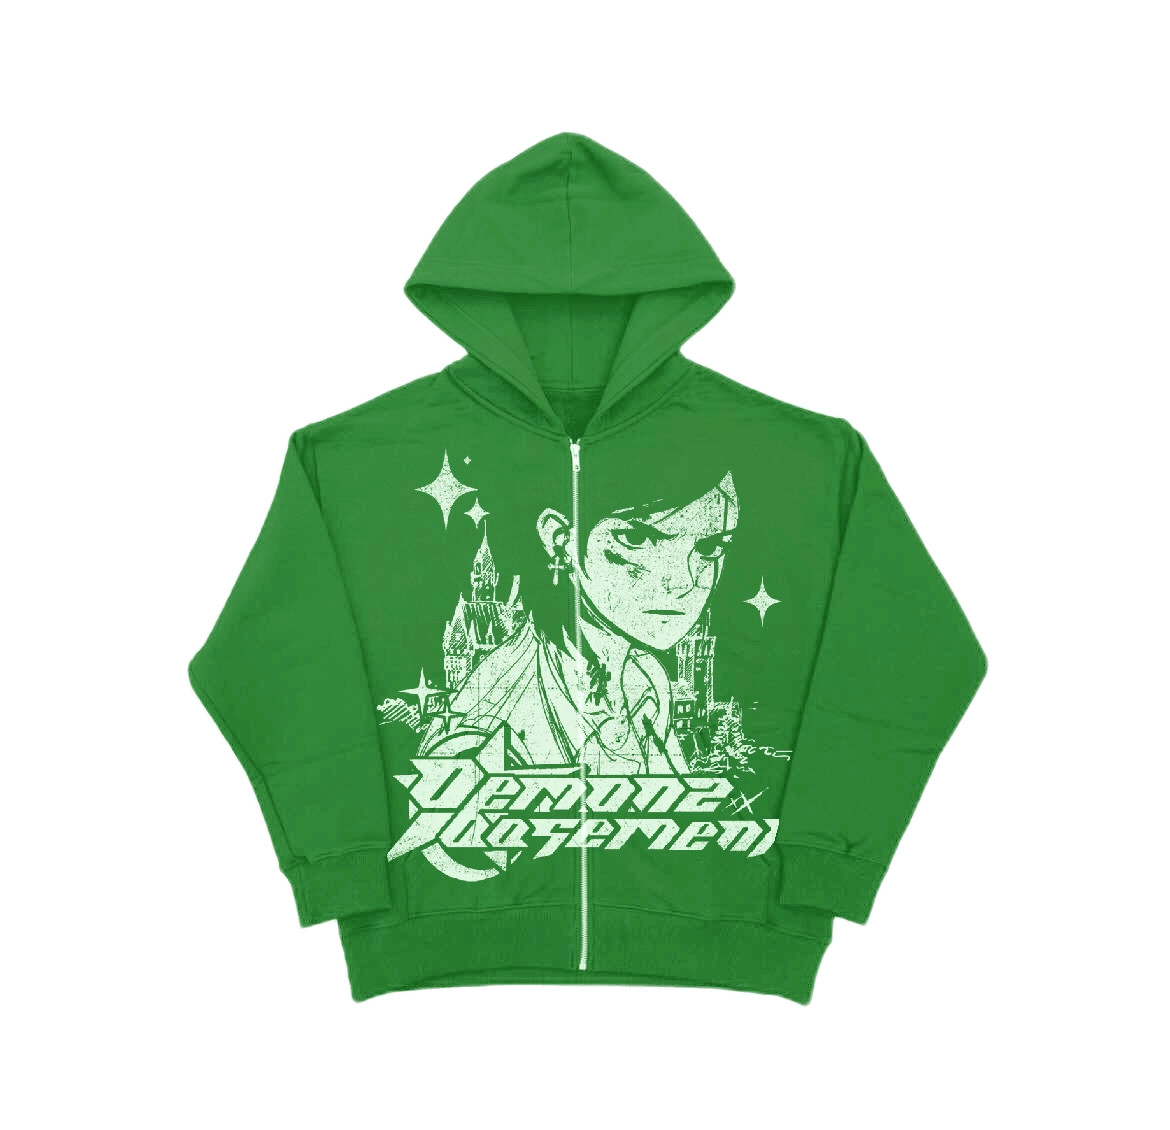 "The Lost World" Zip - Up Jacket